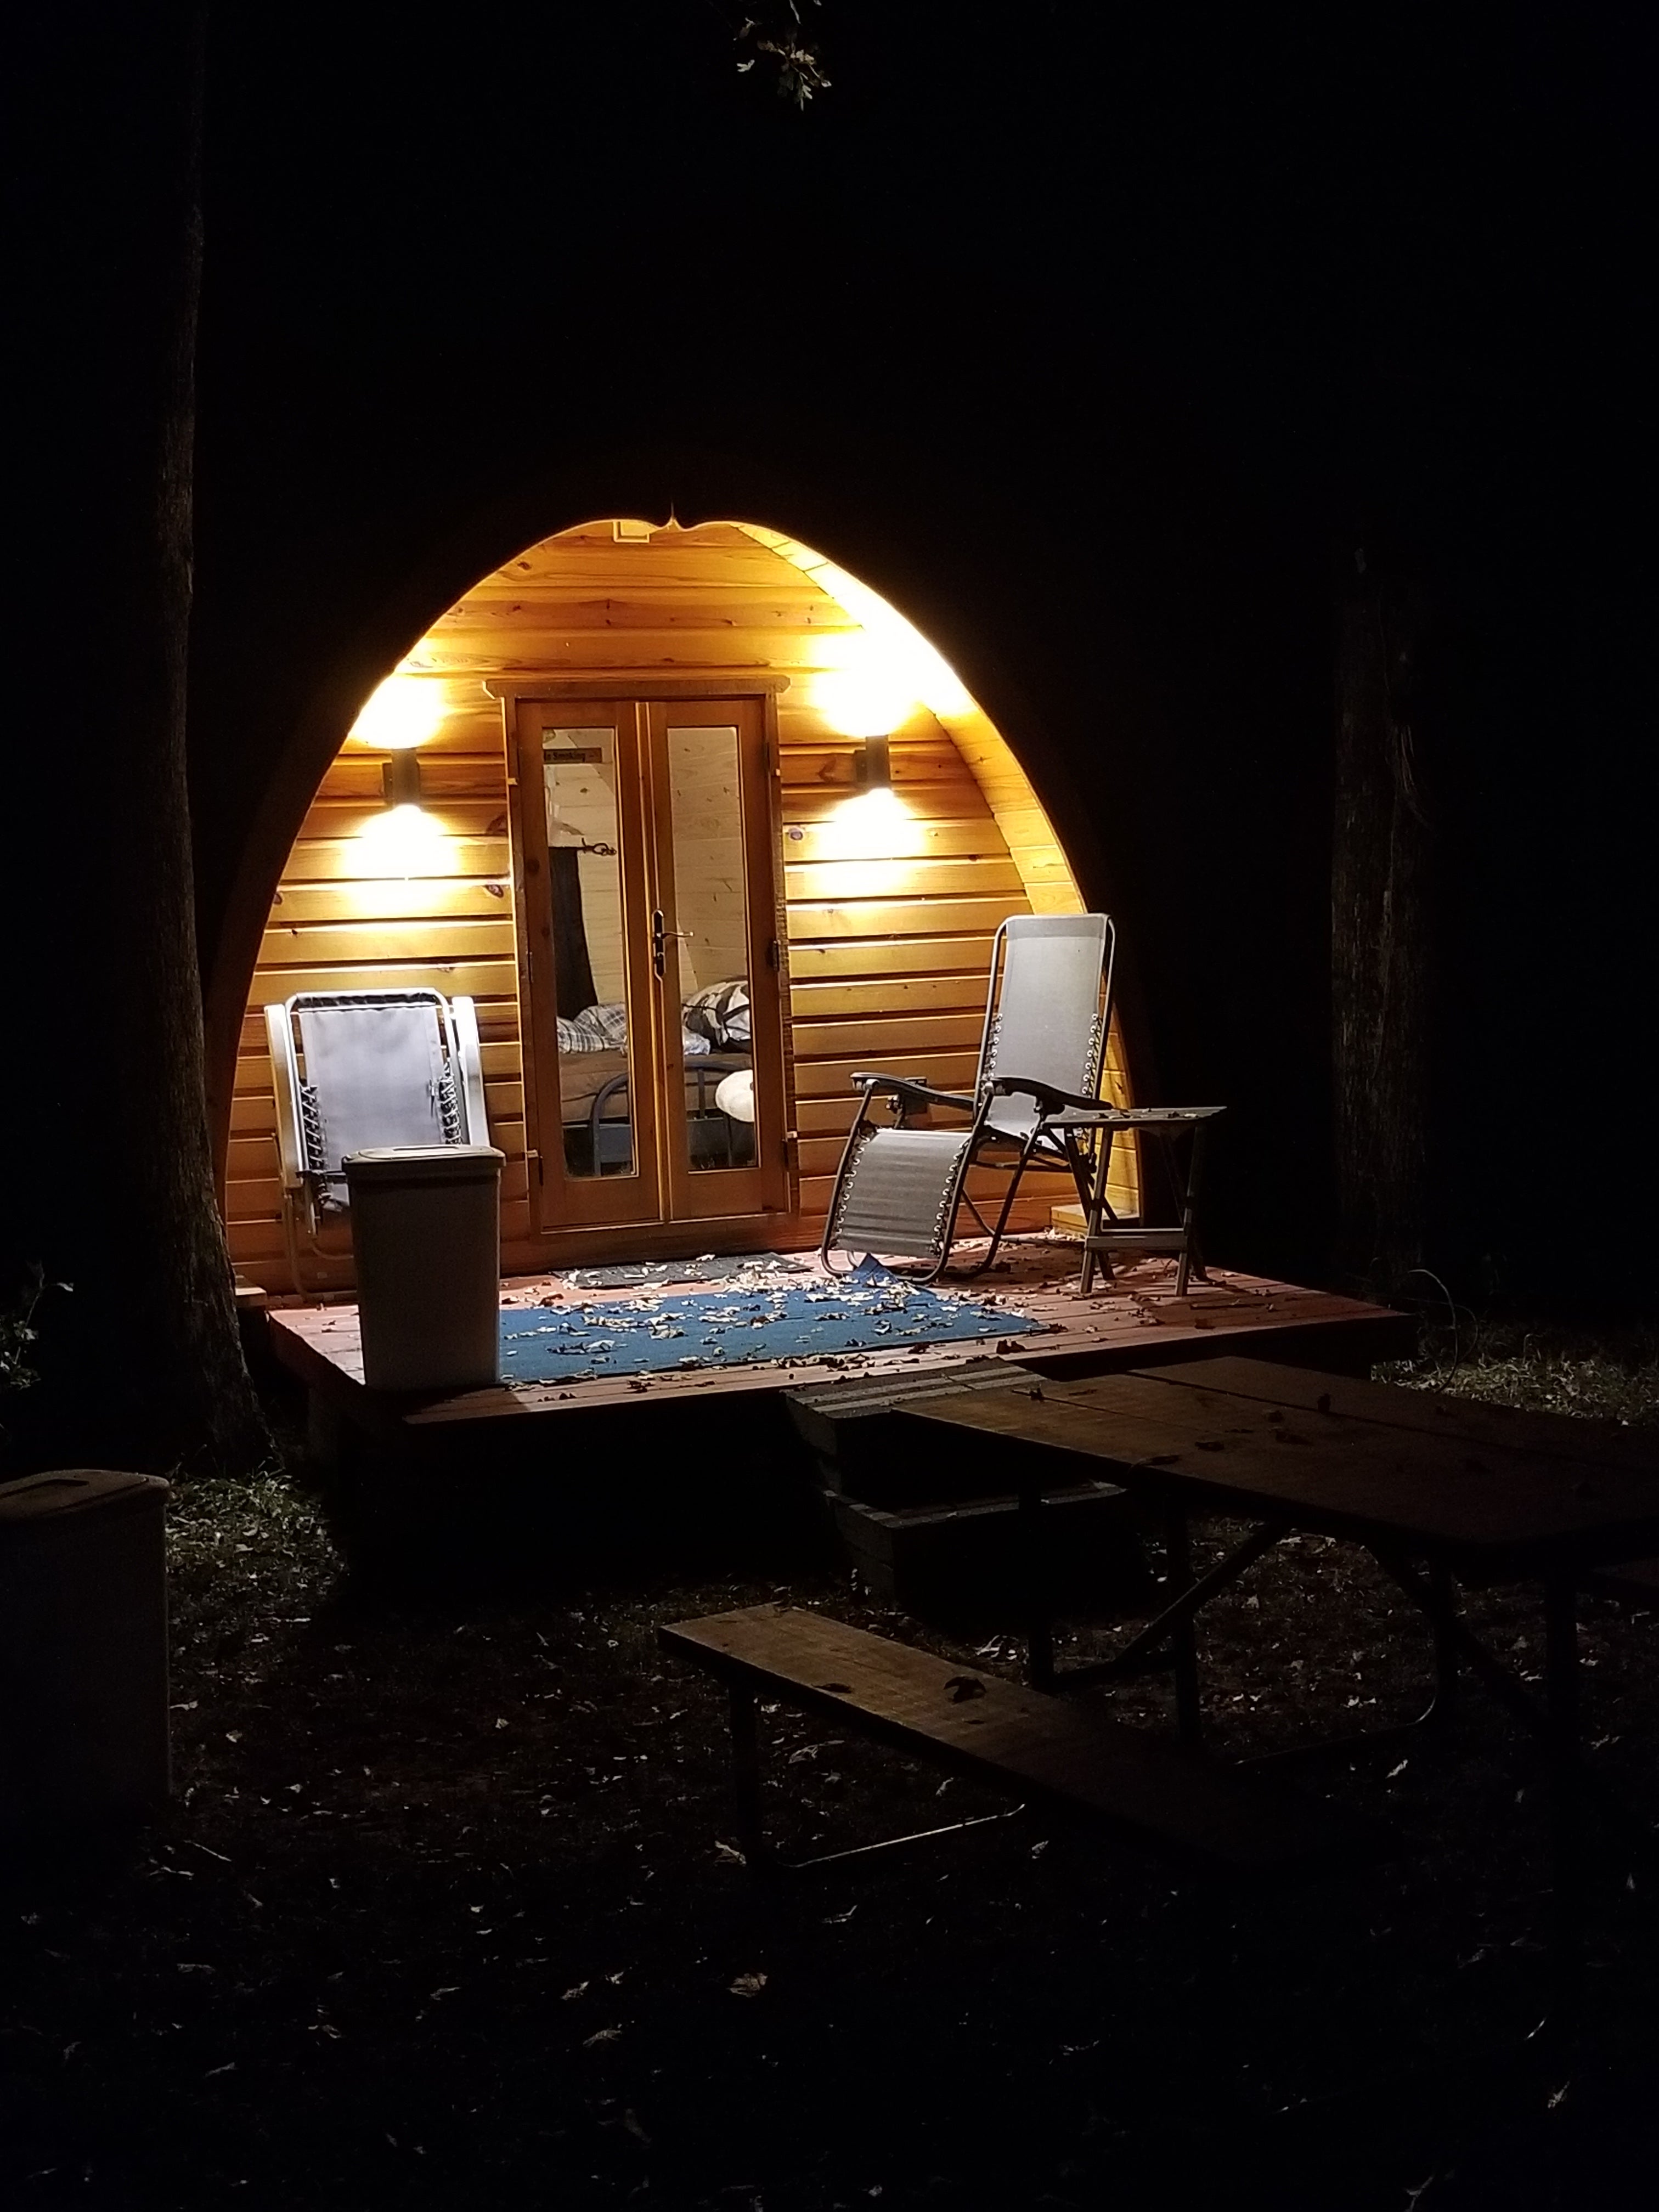 View of the Glamping Pod at night